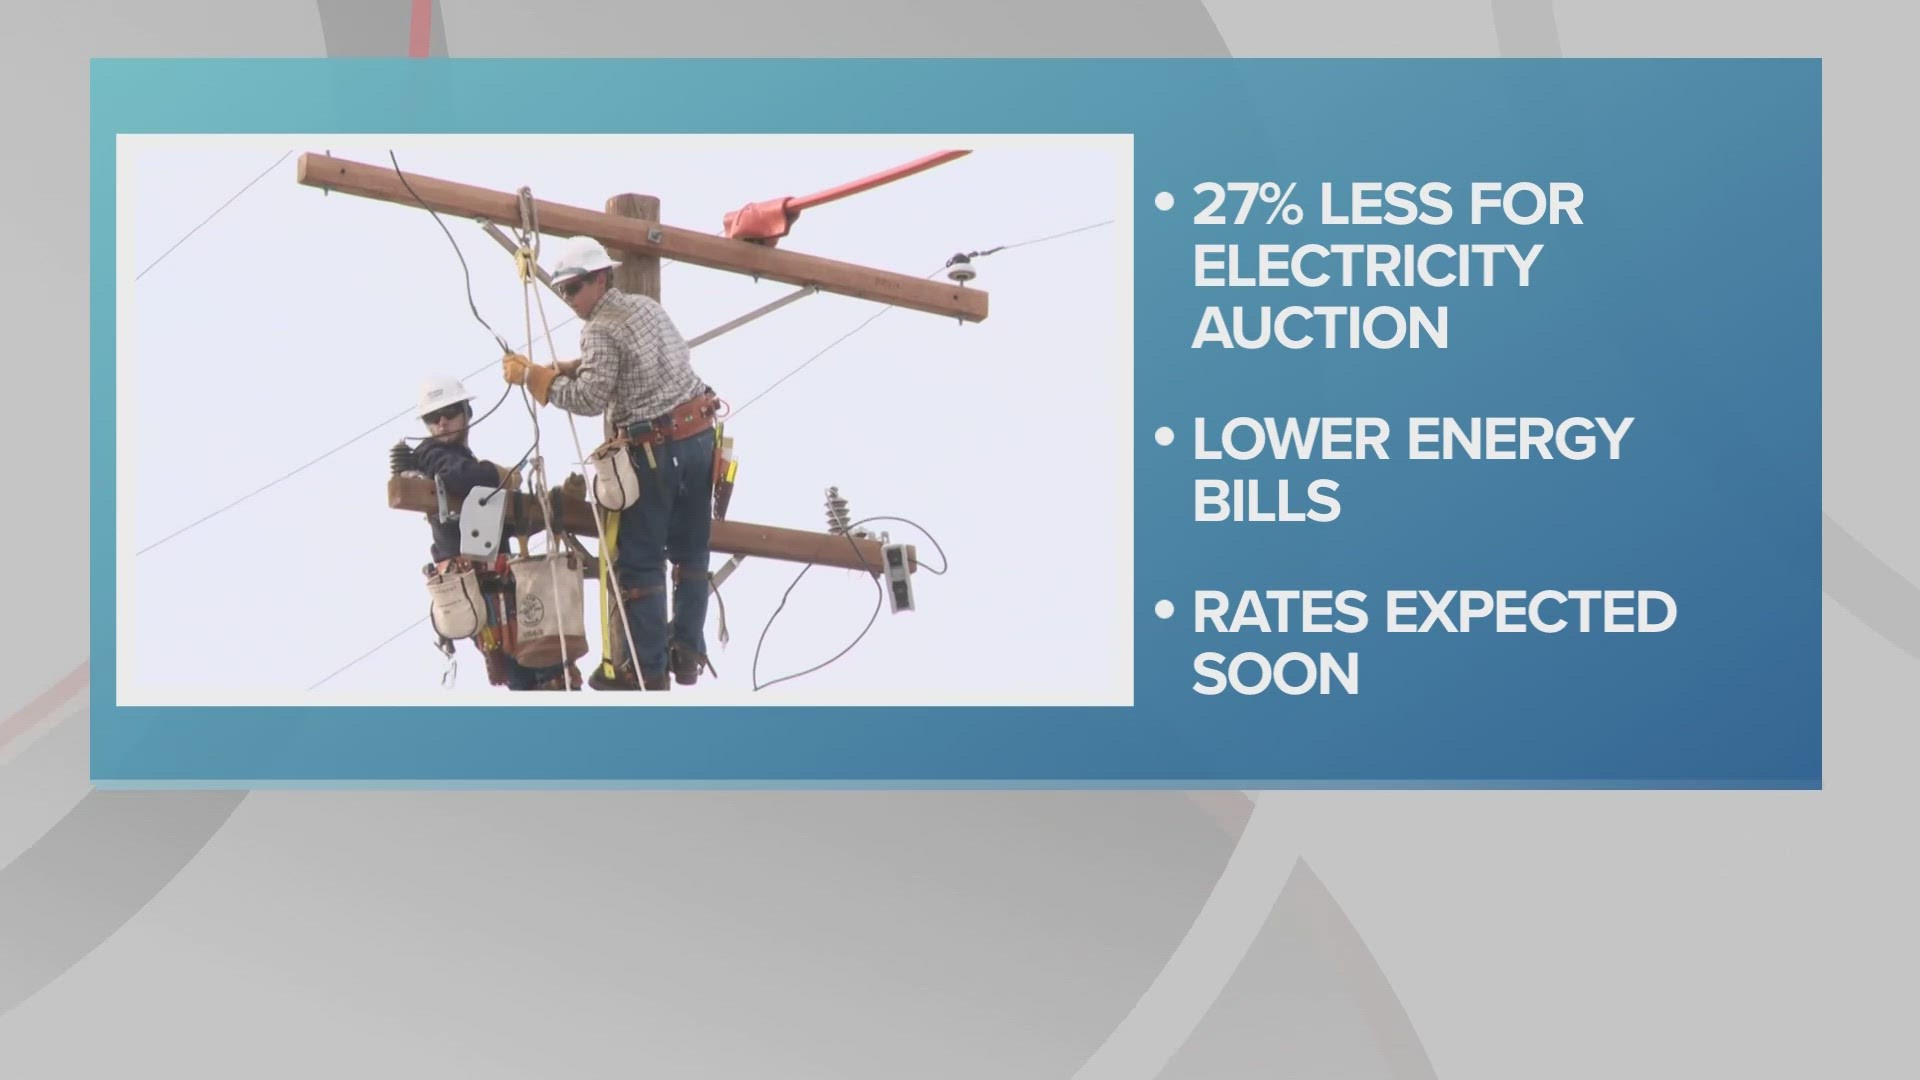 FirstEnergy is paying about 27% less for electricity at auction this year, according to the Public Utilities Commission of Ohio.